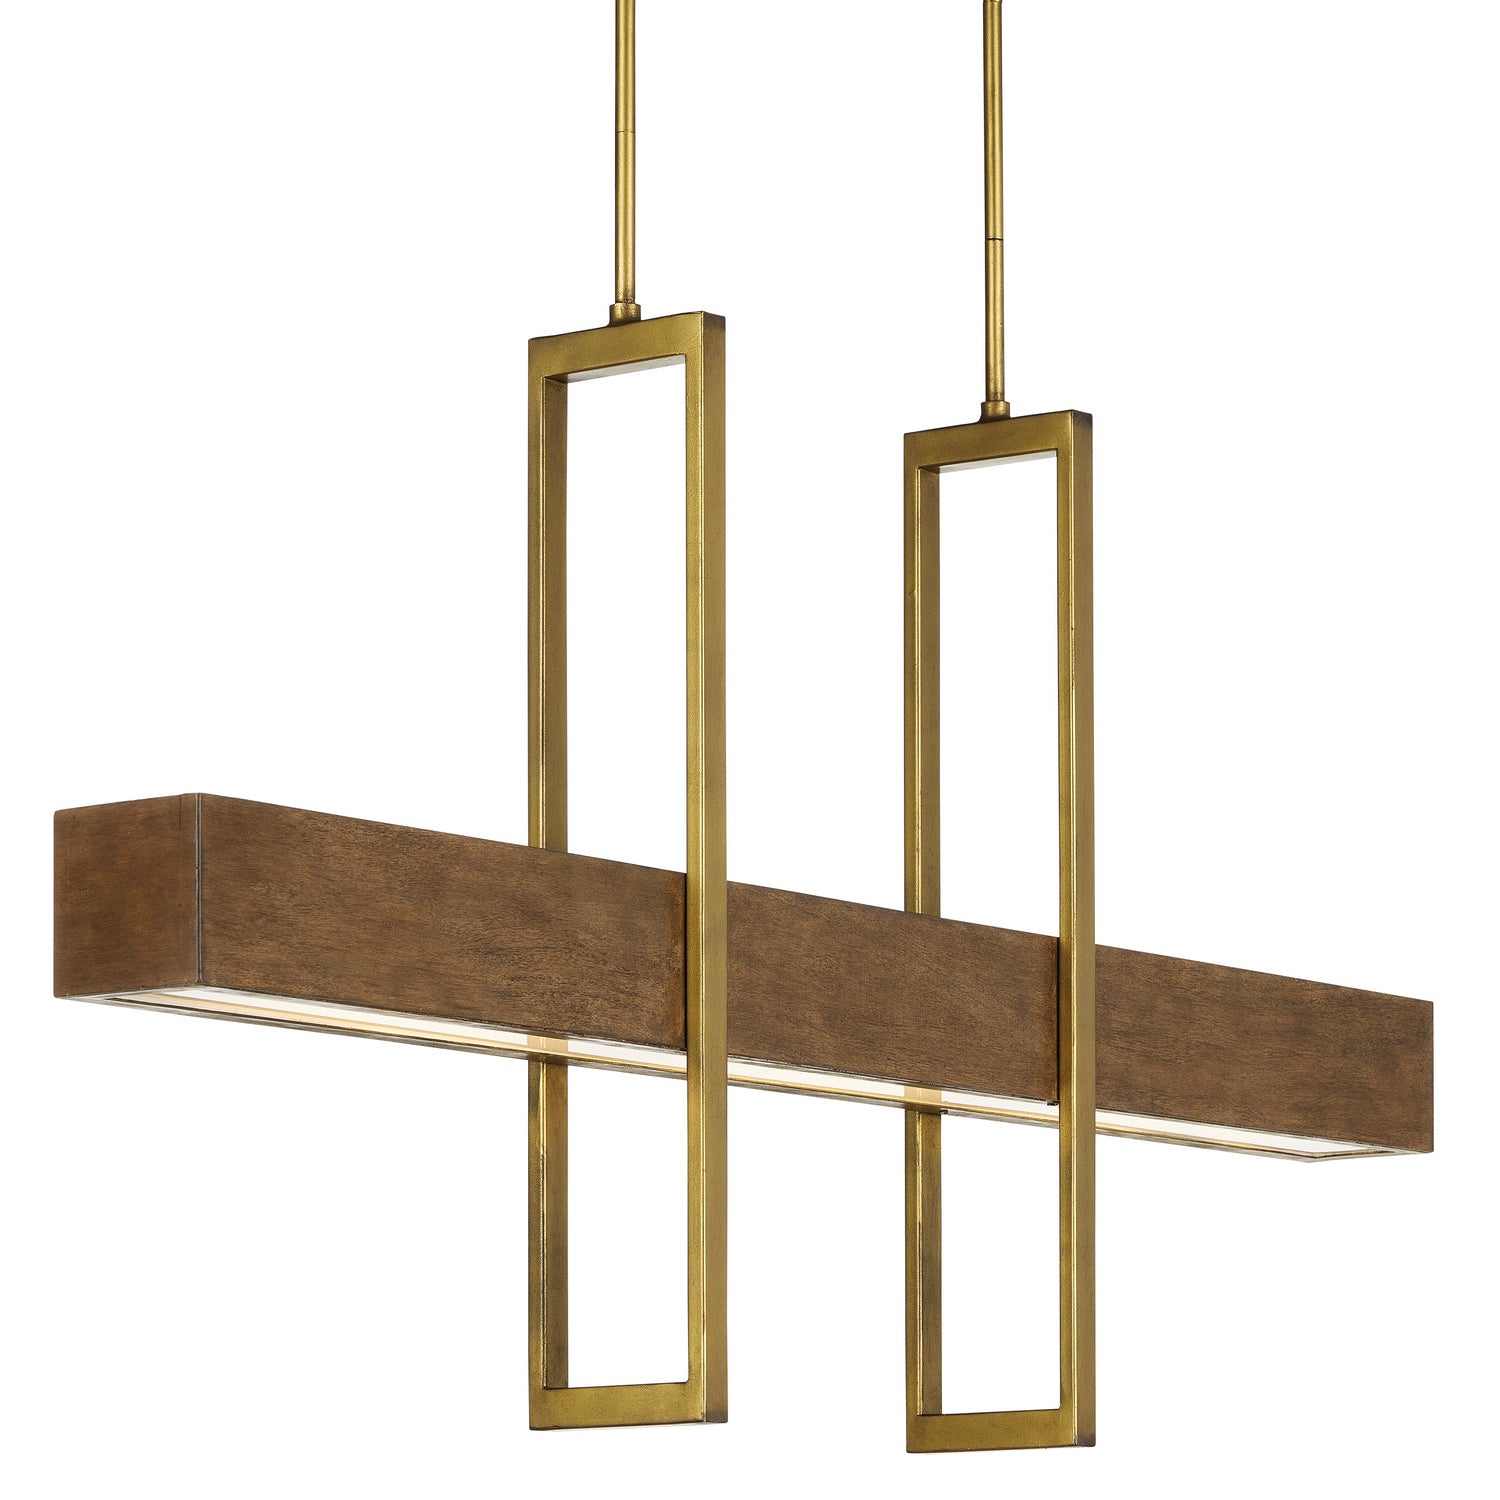 LED Linear Chandelier from the Tonbridge collection in Chestnut/Brass finish